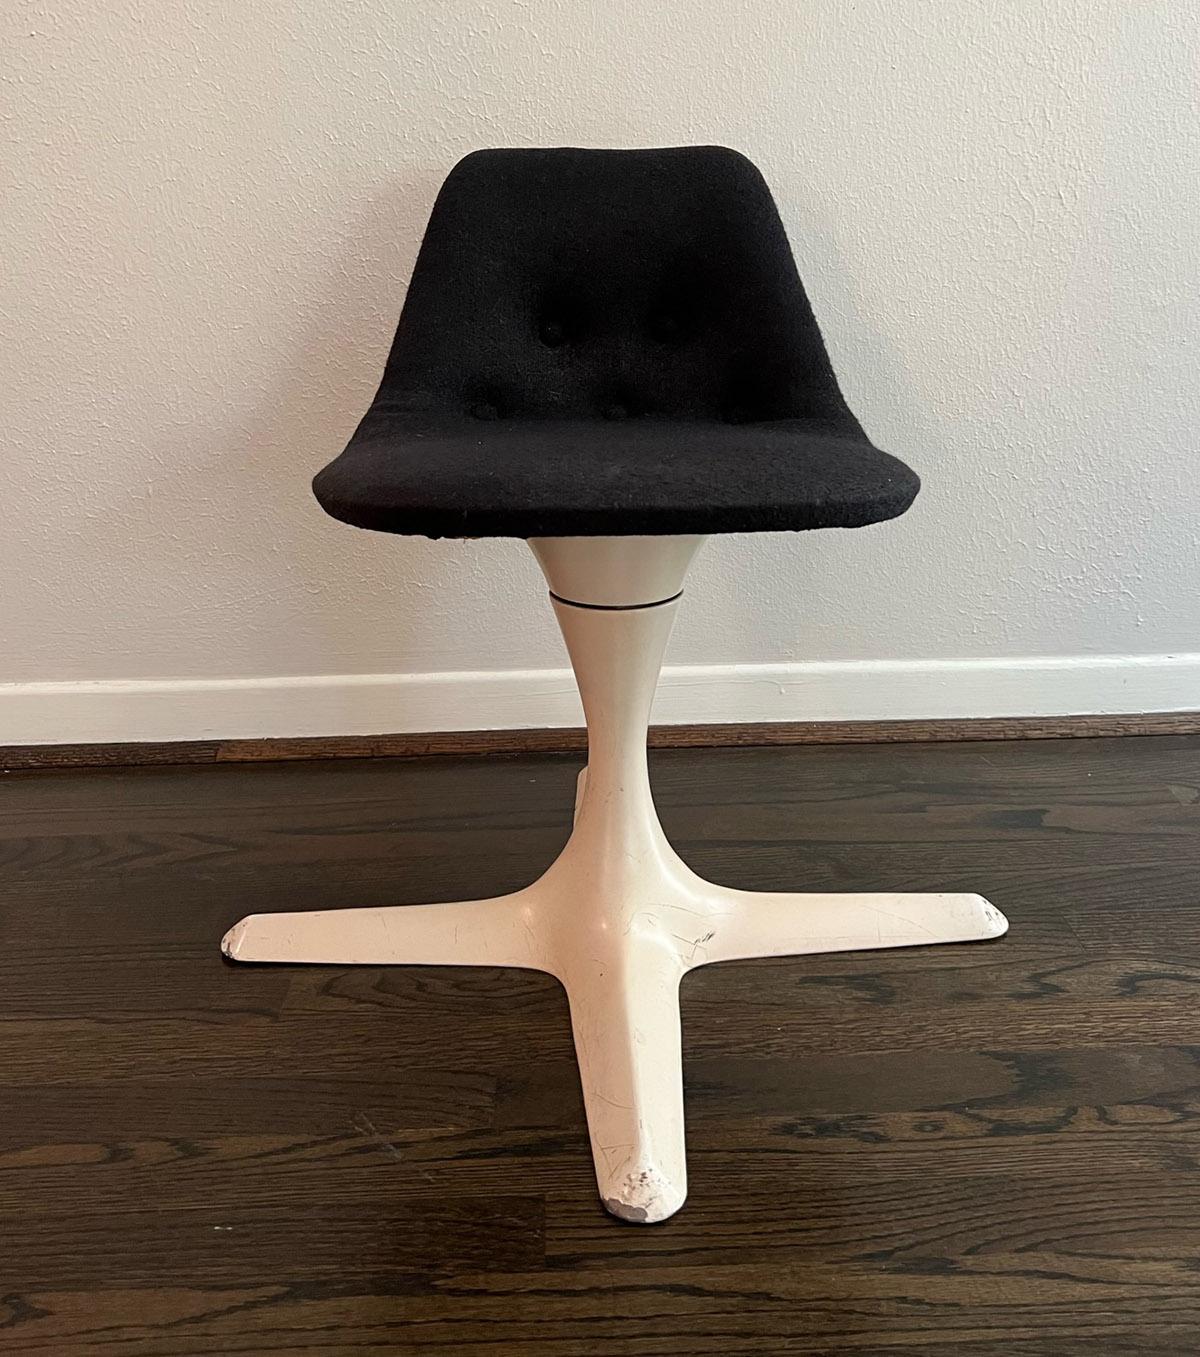 By Burke of Dallas Texas, iconic design and first cousin to Saarinen's tulip chairs. Starburst base with original button tufted upholstery. 
Details
Dimensions
Height: 31in 
Width: 20 in. 
Depth: 20 in.